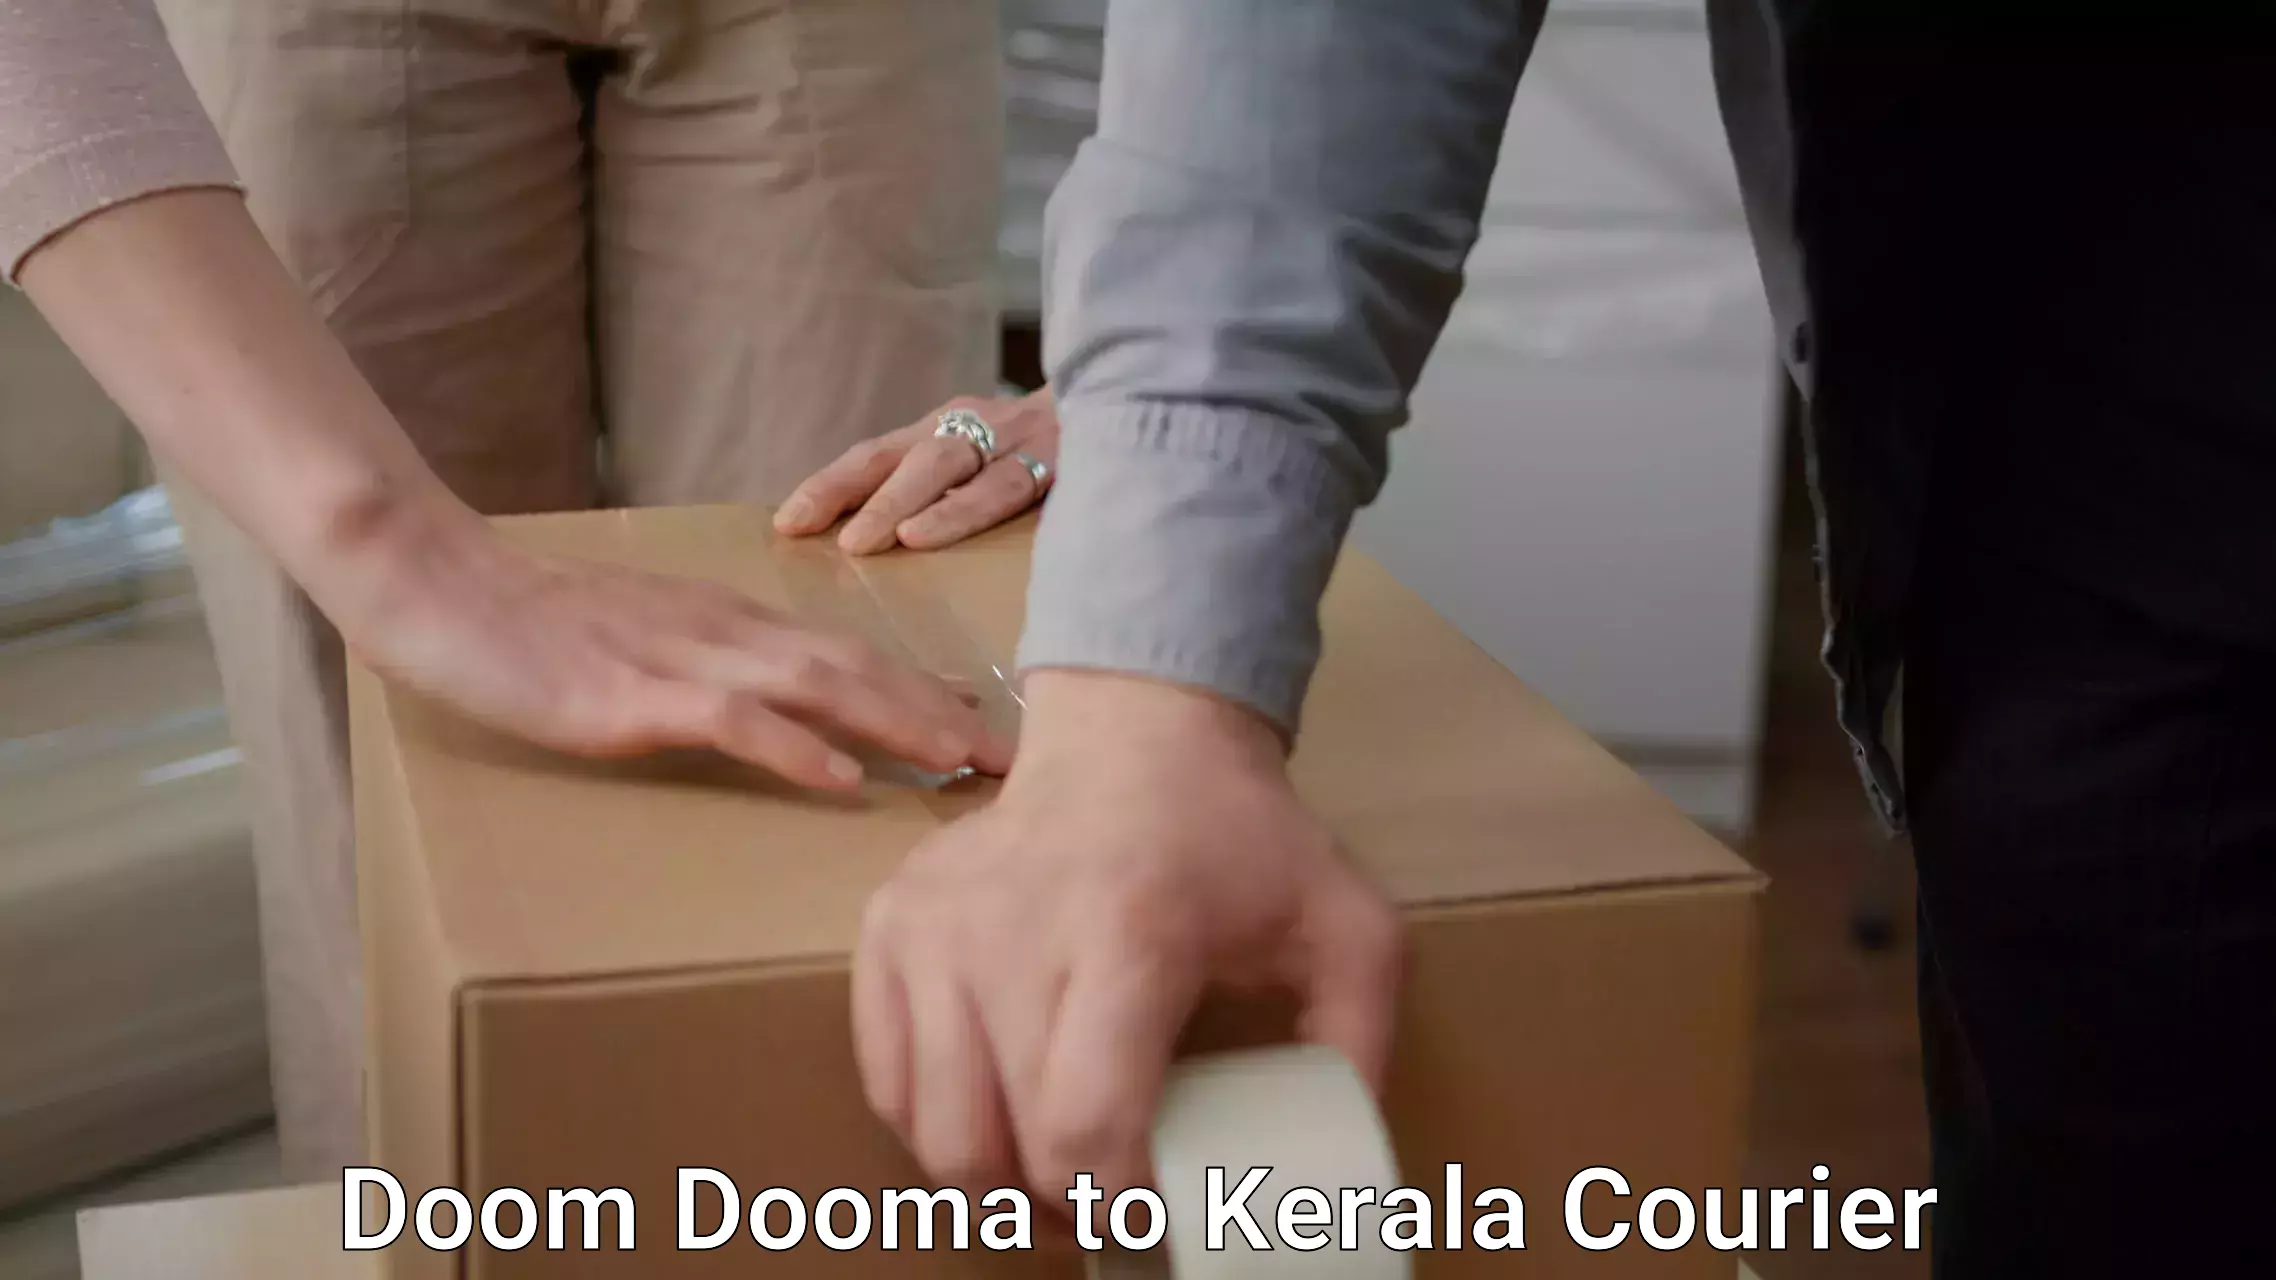 Furniture transport company Doom Dooma to Cochin University of Science and Technology